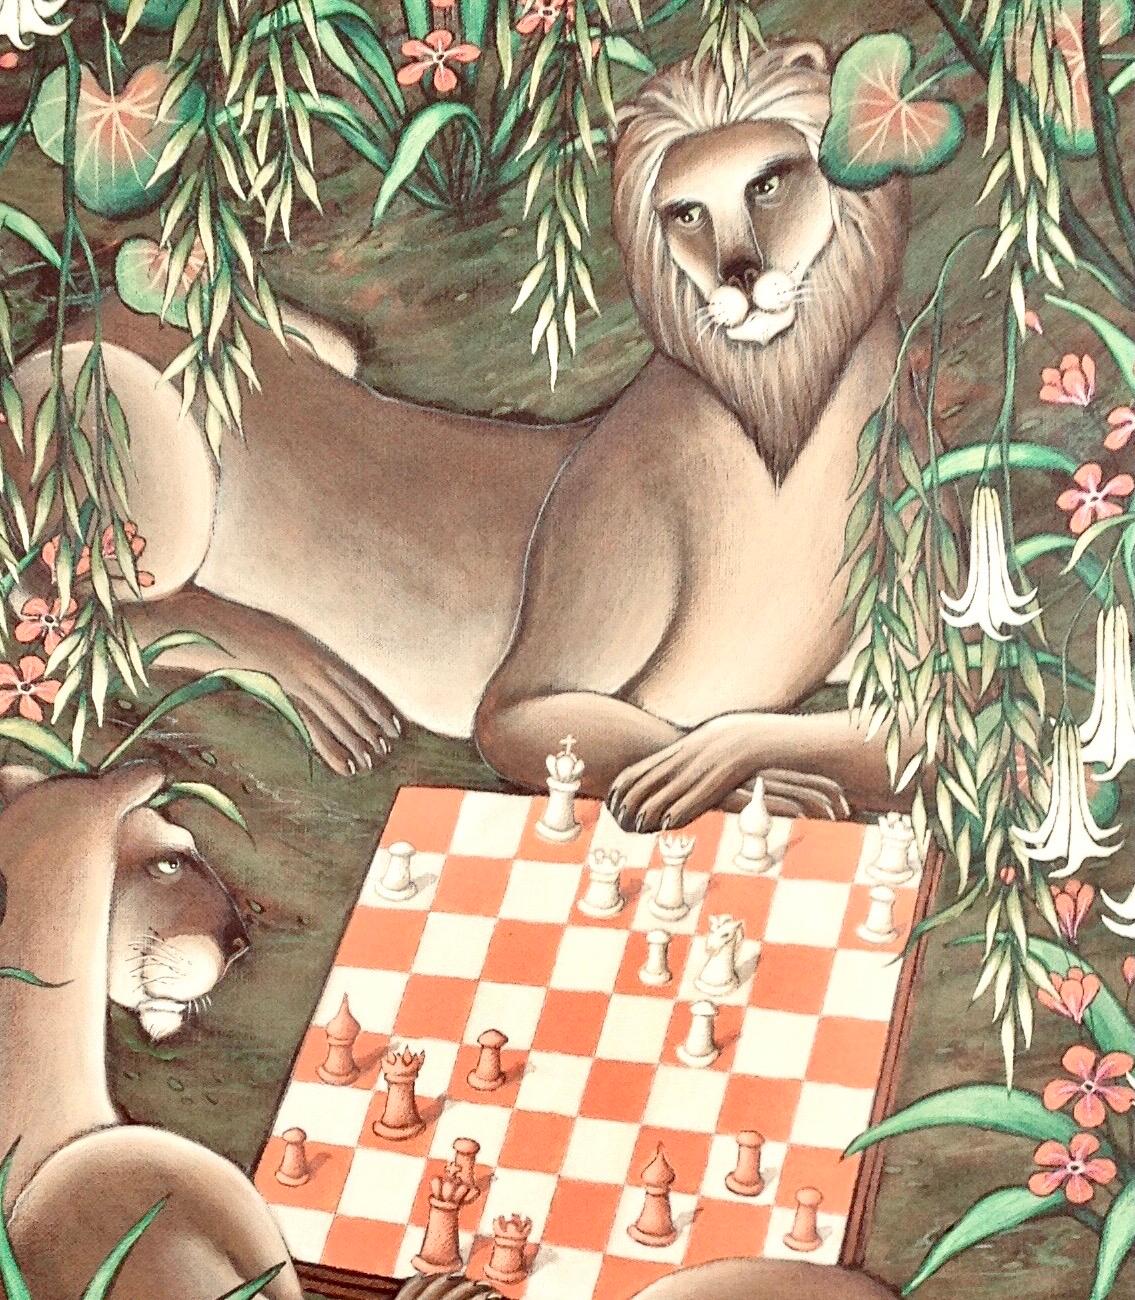 Lion and lioness playing chess, the game of kings, in a lush tropical jungle setting. 